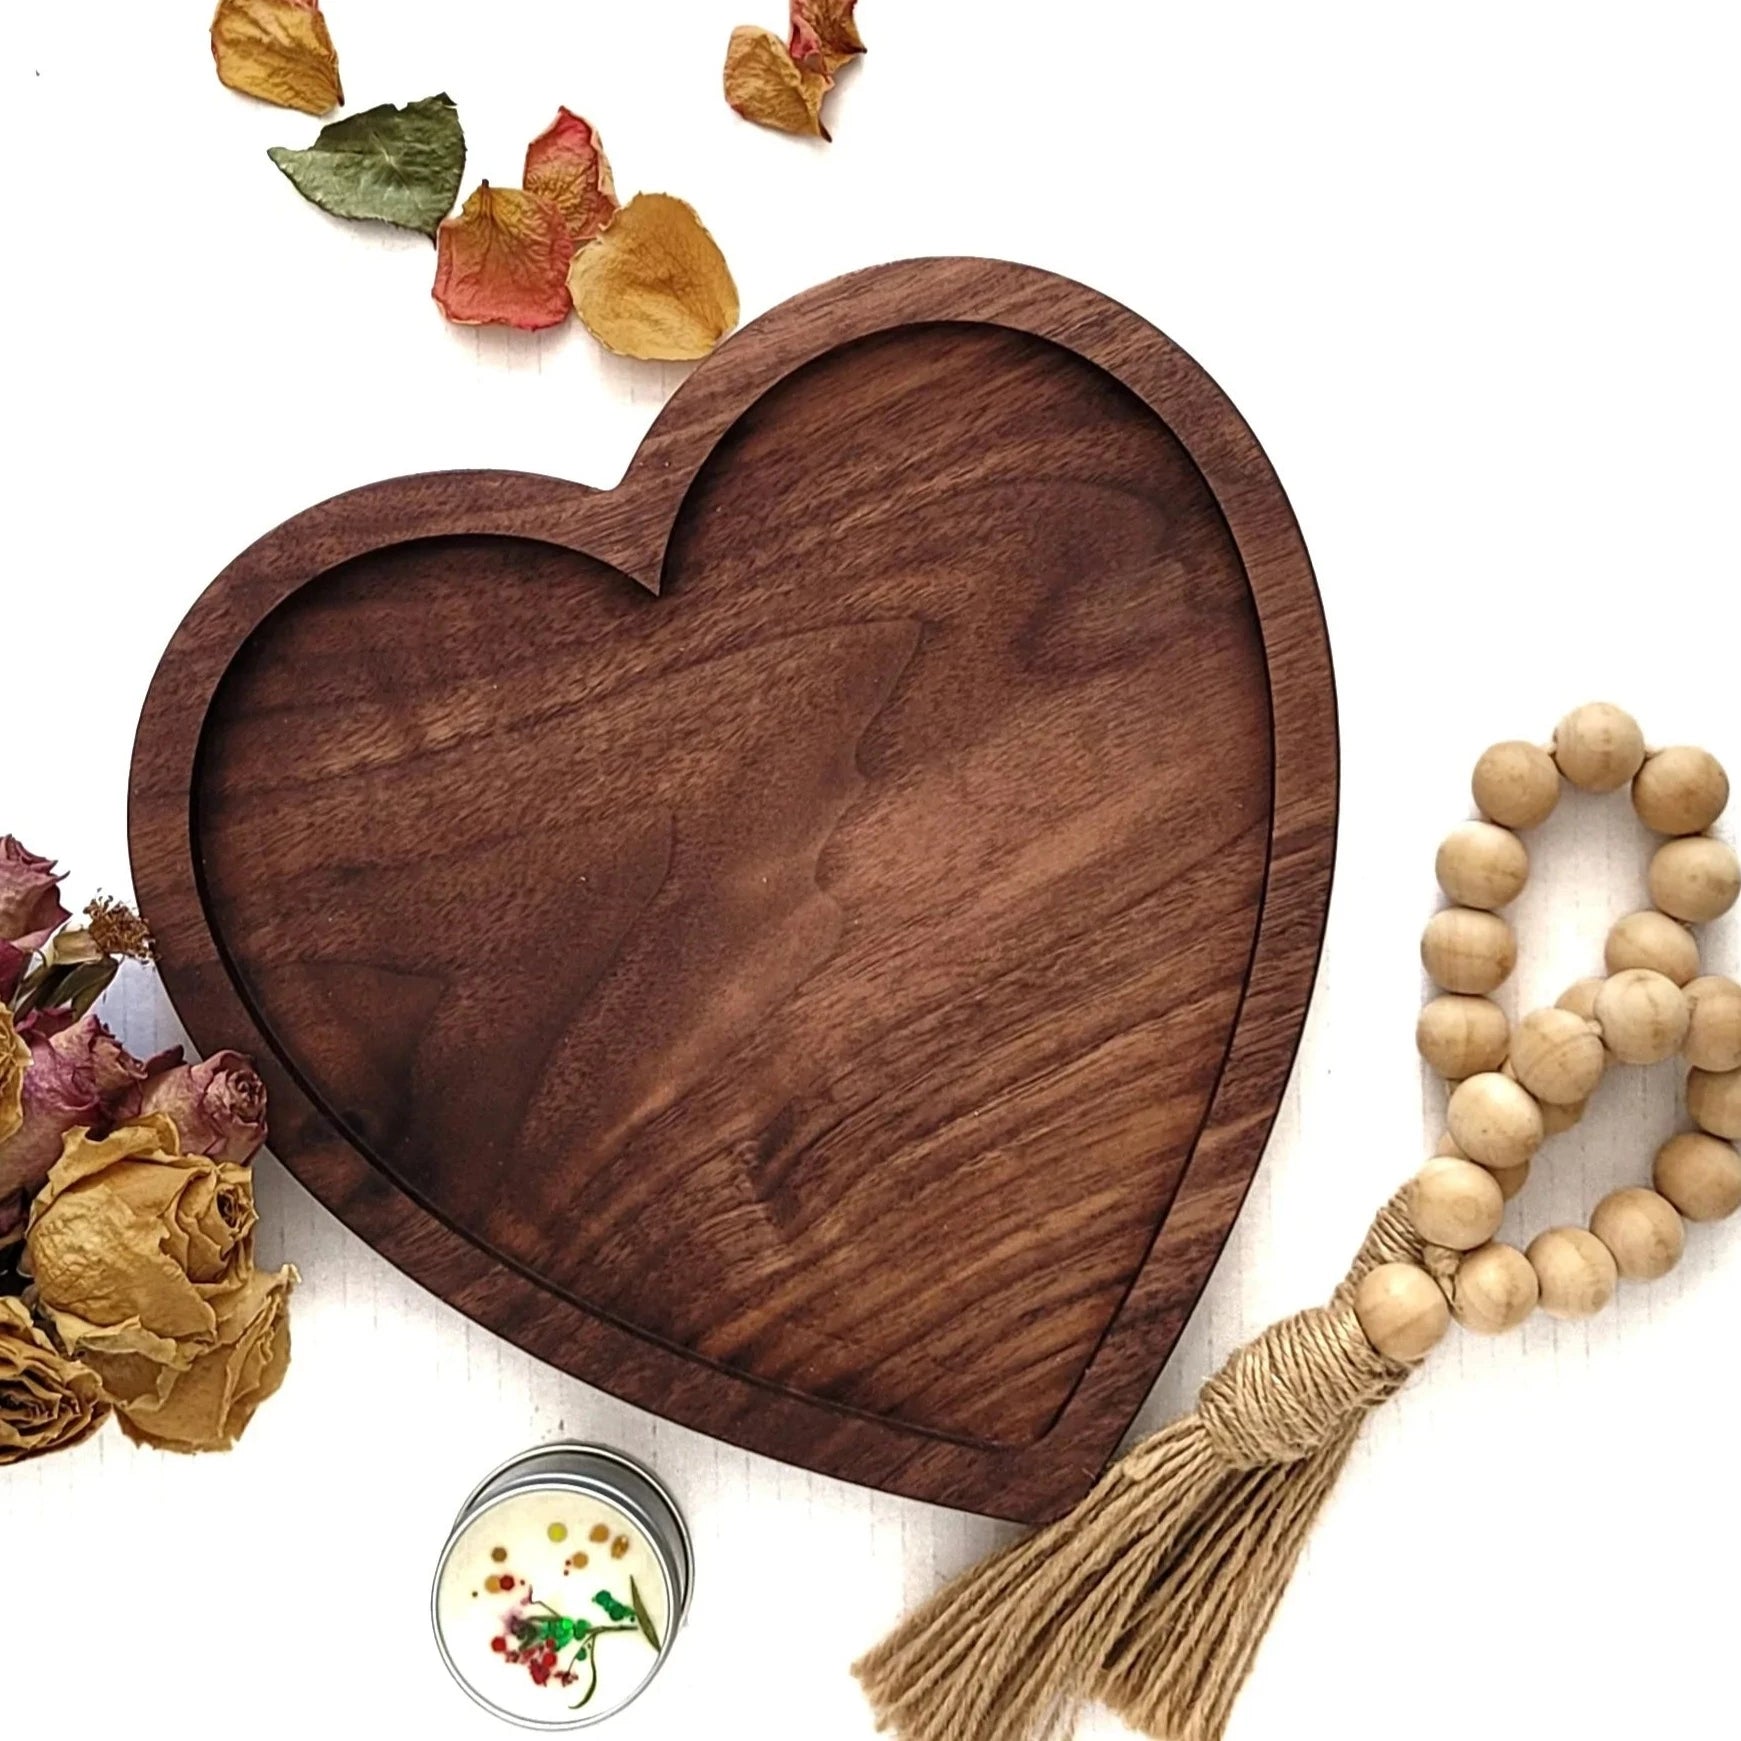 Personalized heart wooden tray with intricate design, ideal for displaying keepsakes and jewelry